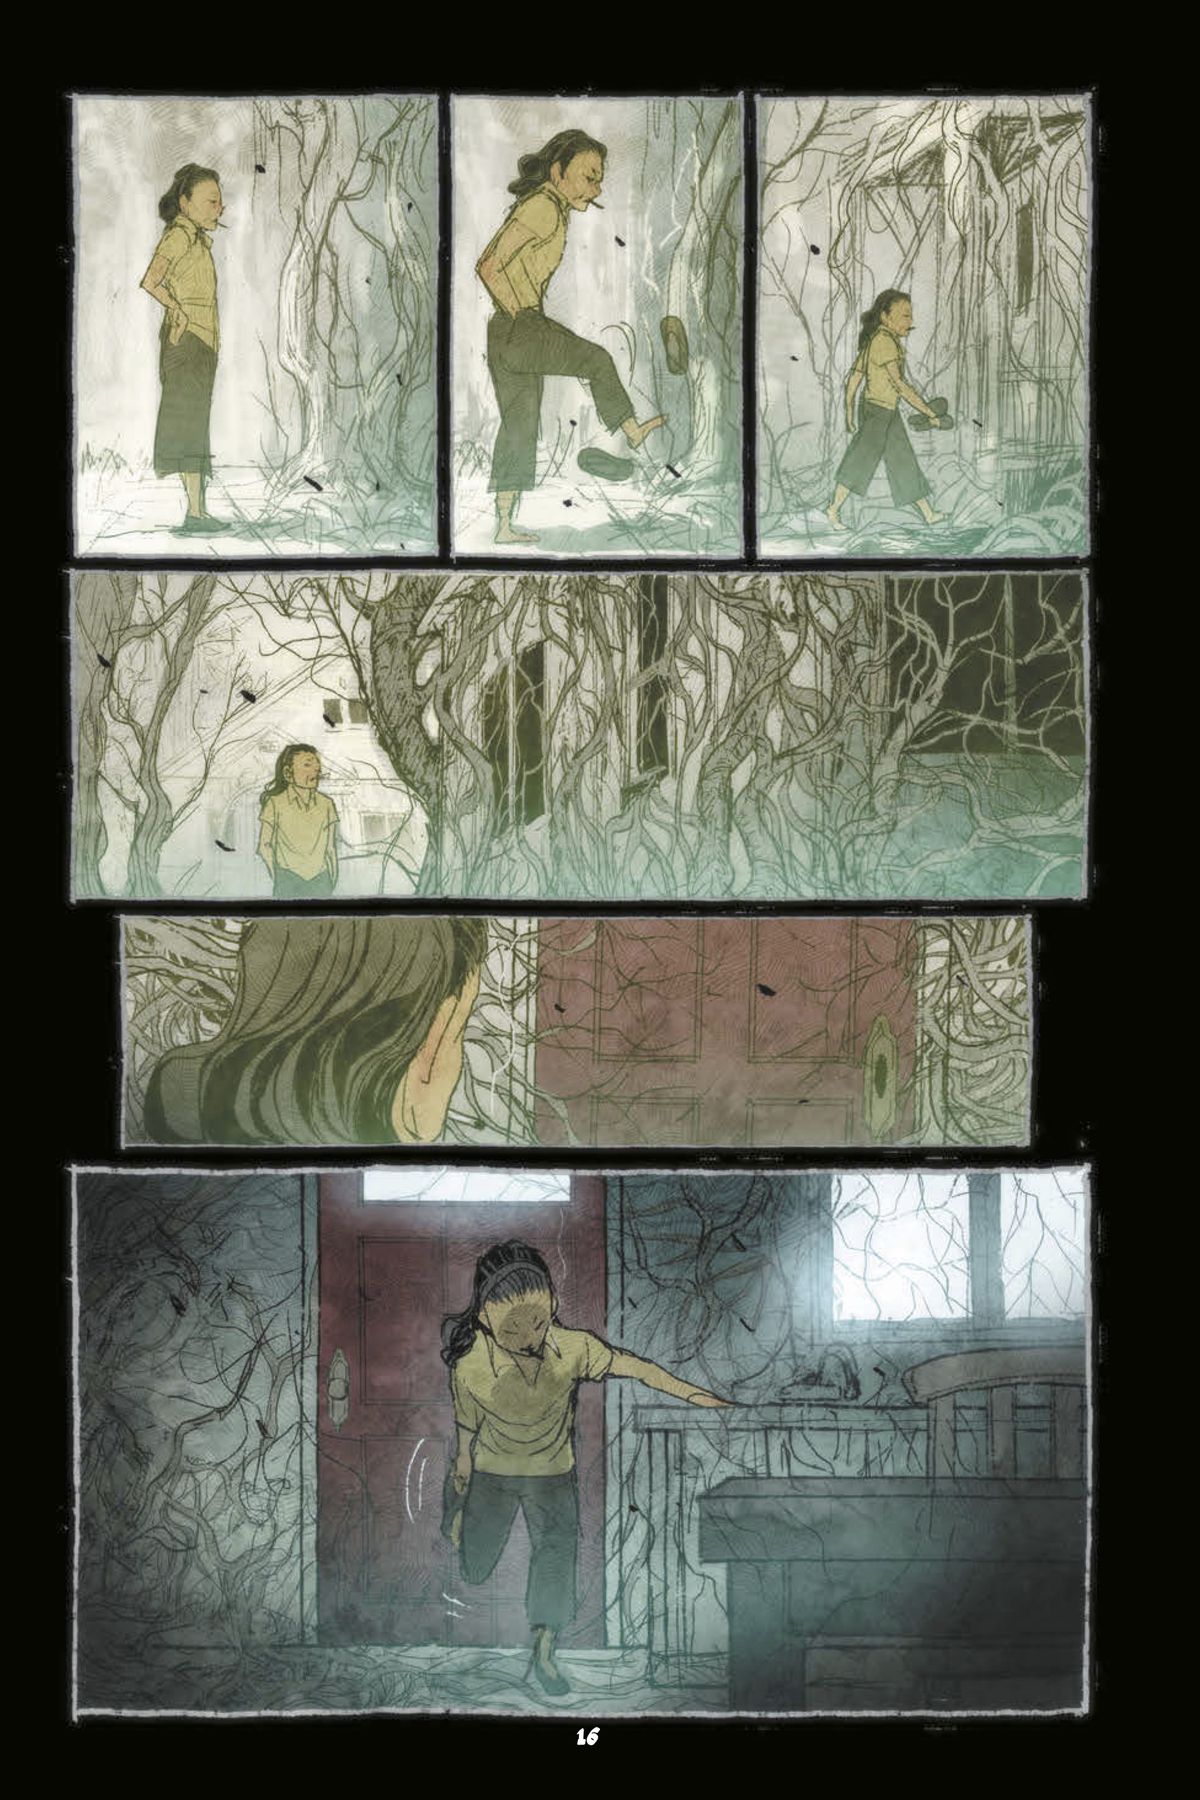 In a page from Abrams ComicArts’ graphic novel Night Eaters, protagonist Ipo Ting examines the neighborhood house covered in branches and vines, kicks off her slippers and carries them inside, then pauses inside the tangle of ivy inside the door as she pulls her slippers back on.